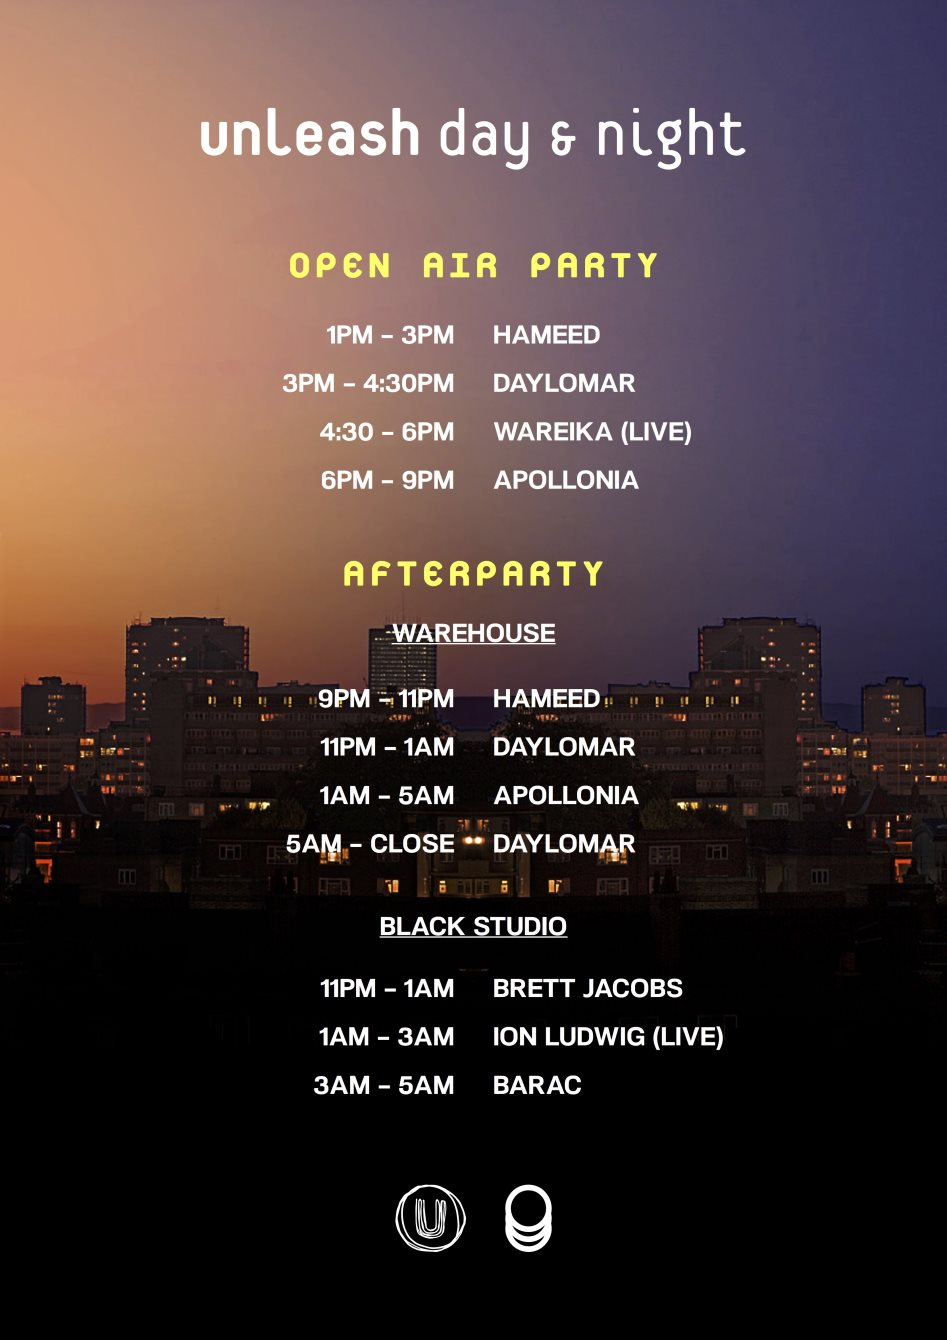 Unleash Open Air & Afterparty with Apollonia, Wareika, Ion Ludwig, Barac - Flyer back